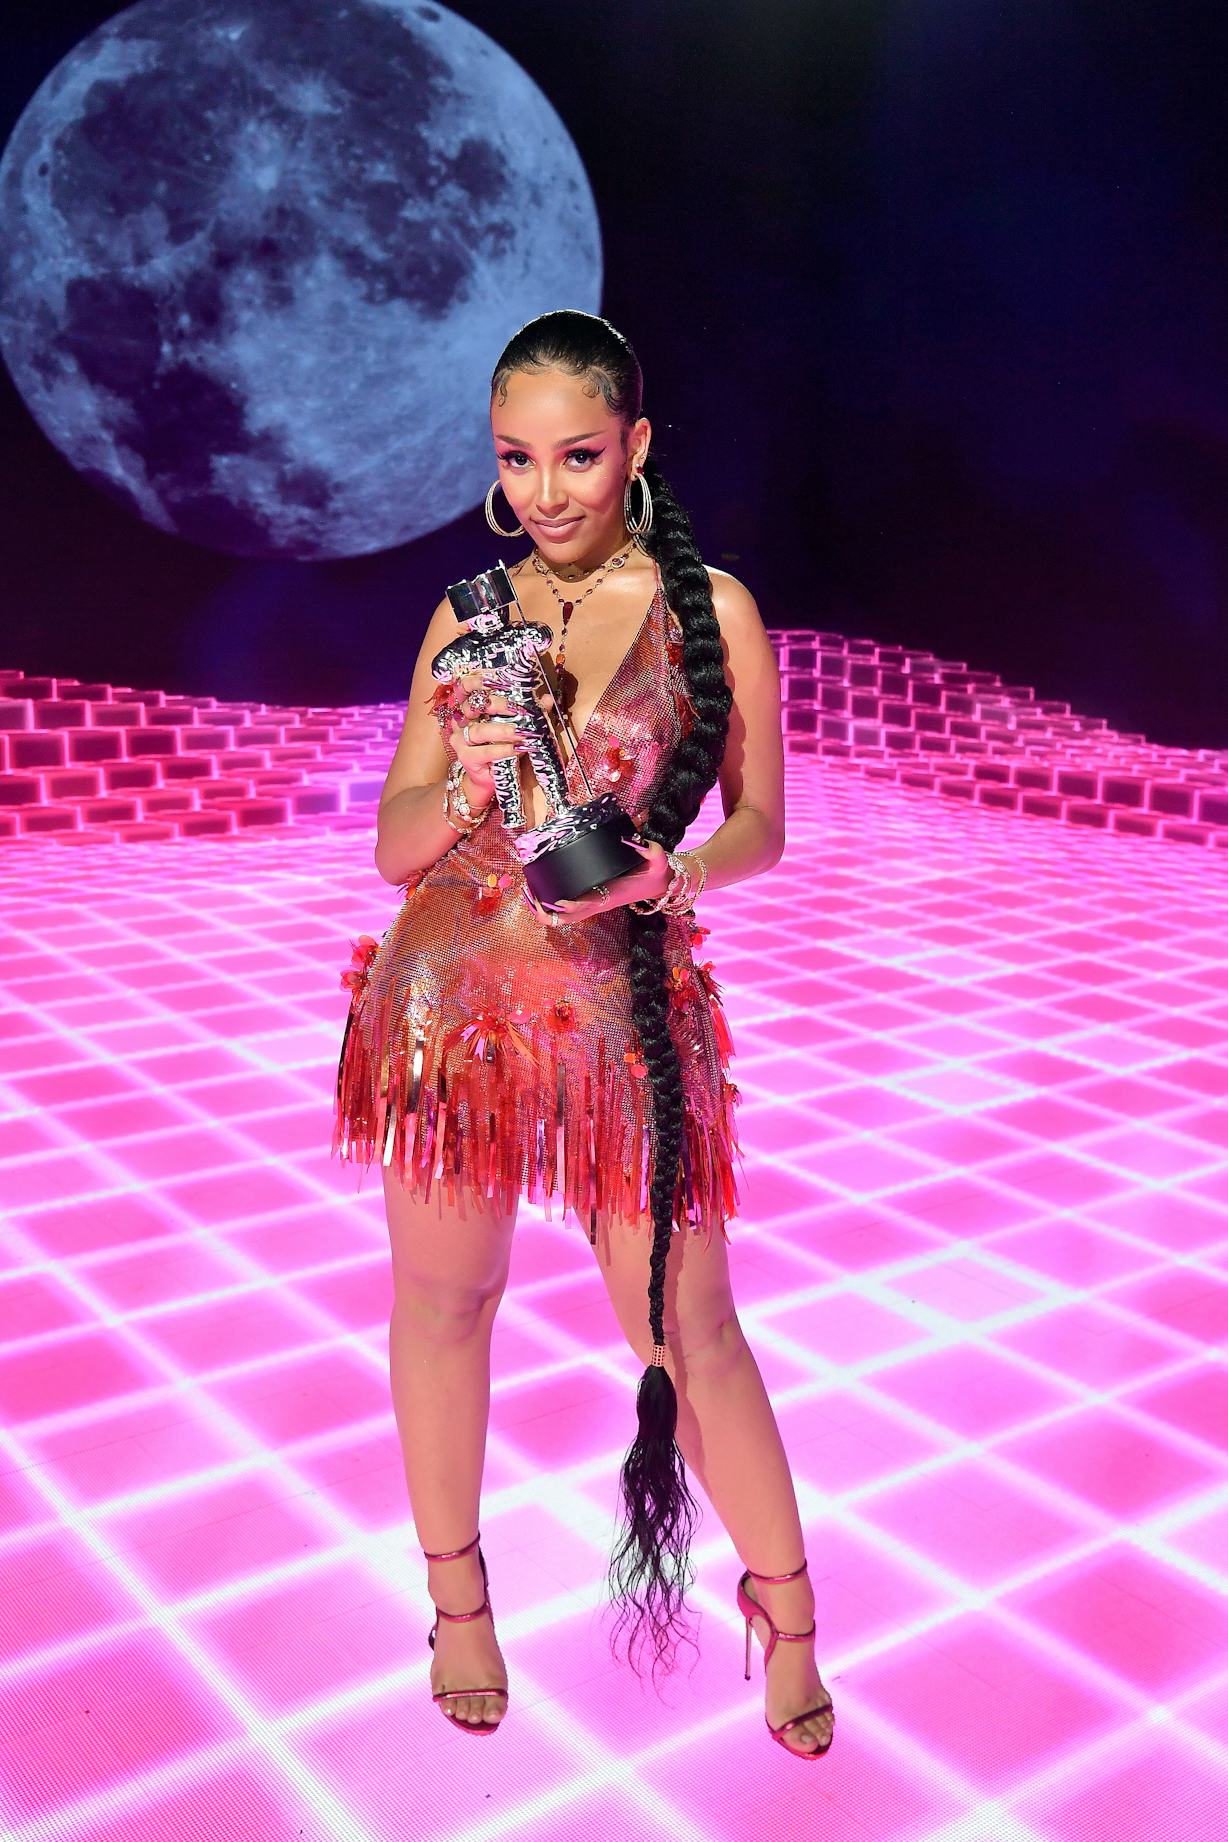 2021 MTV VMAs How To Watch & Stream, Host & Performers